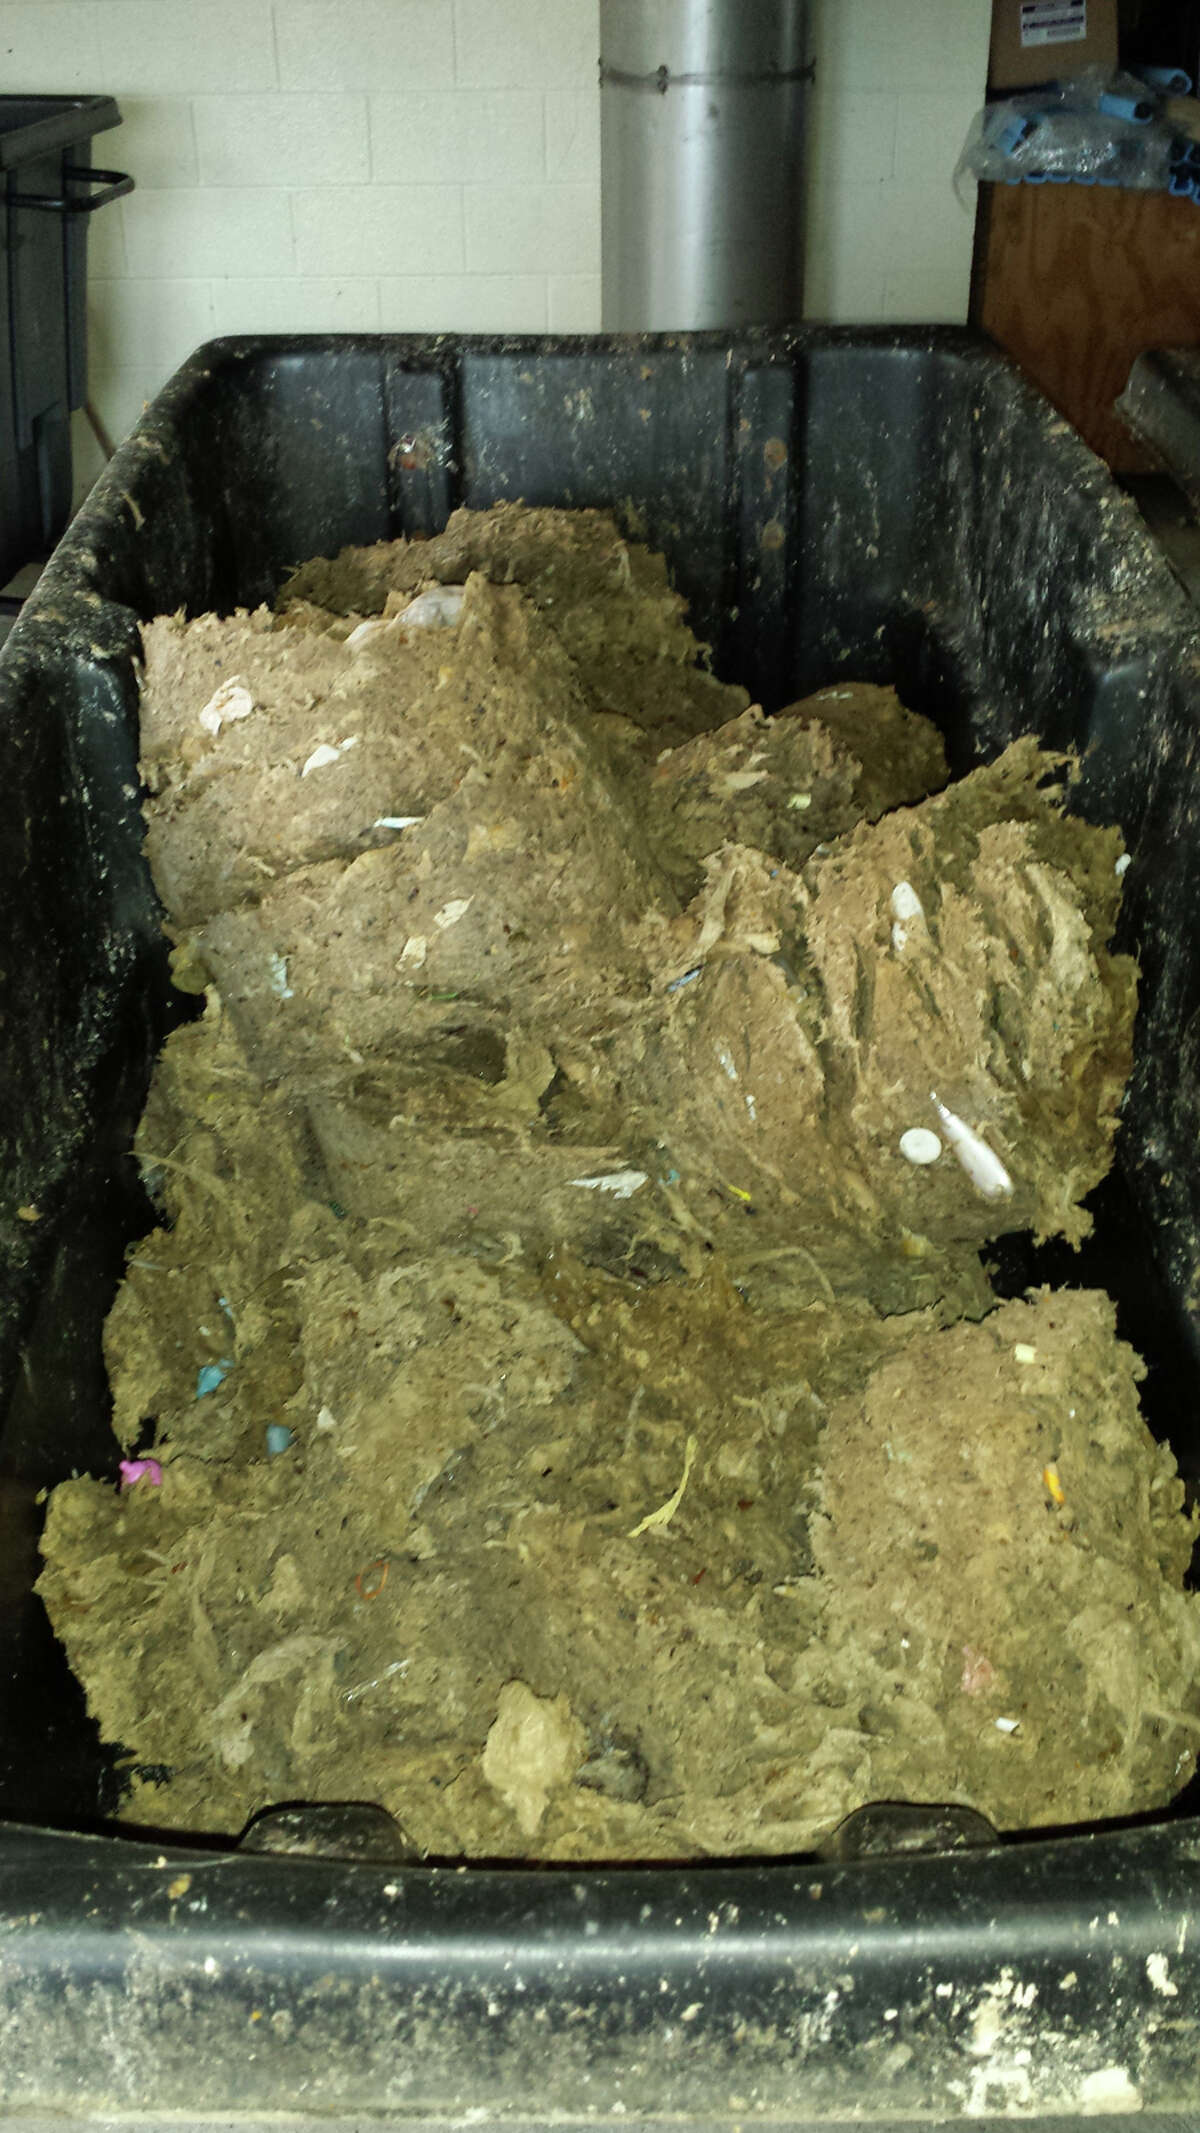 Municipal sewer systems have been getting clogged by items like baby wipes. Ansonia will be sending a notice to homeowners advising them not to flush wipes.